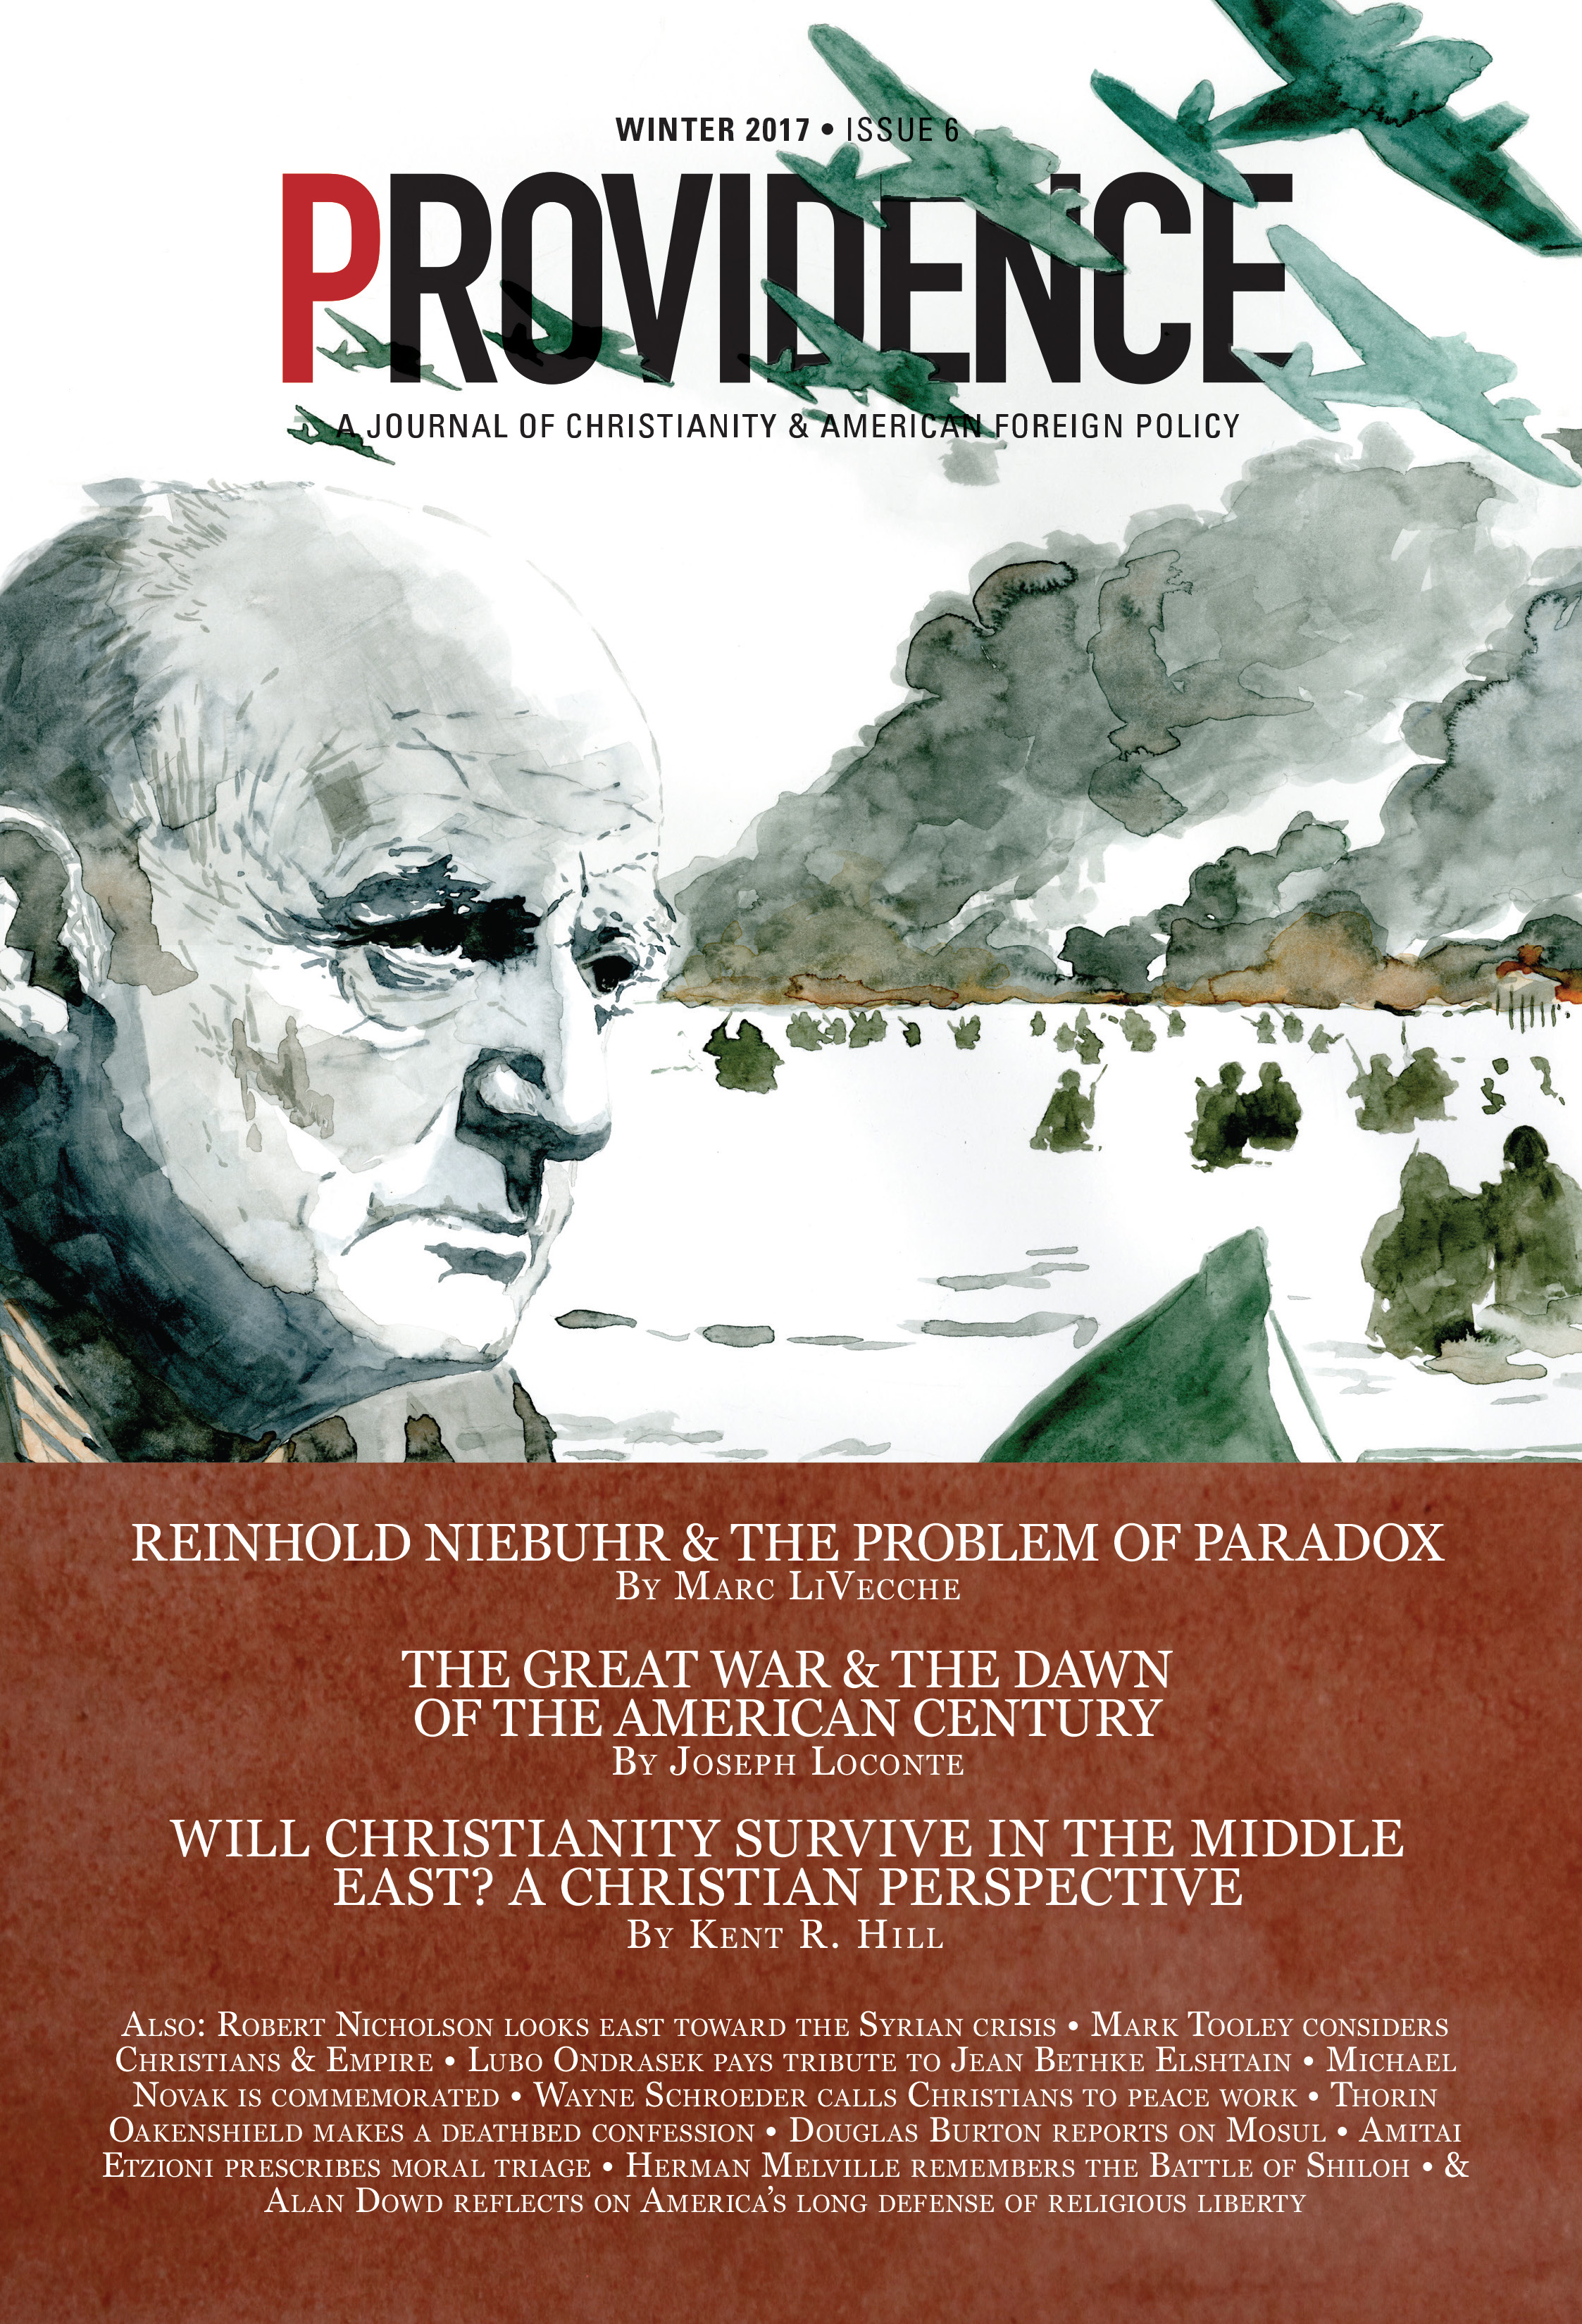 Providence: A Journal of Christianity & American Foreign Policy - Issue 6 Winter 2017 Cover